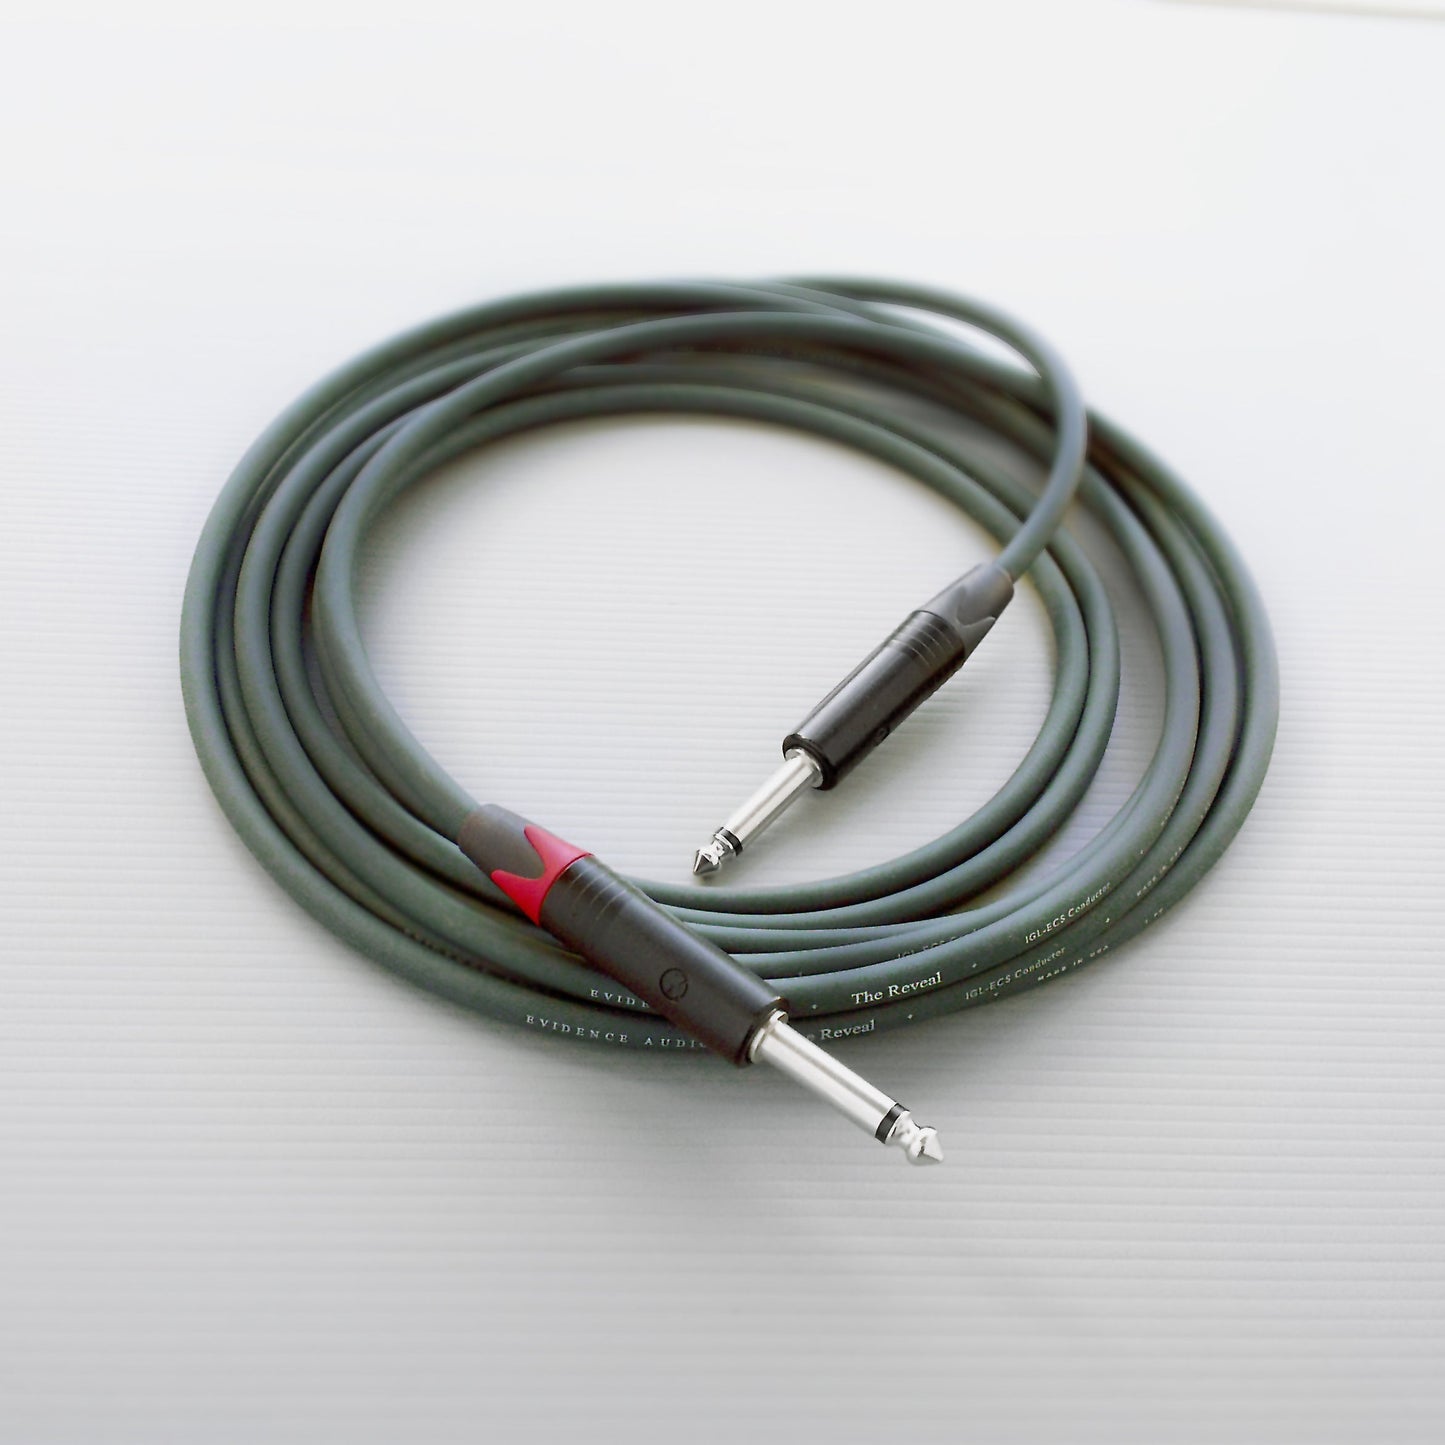 The Reveal Audio Cable